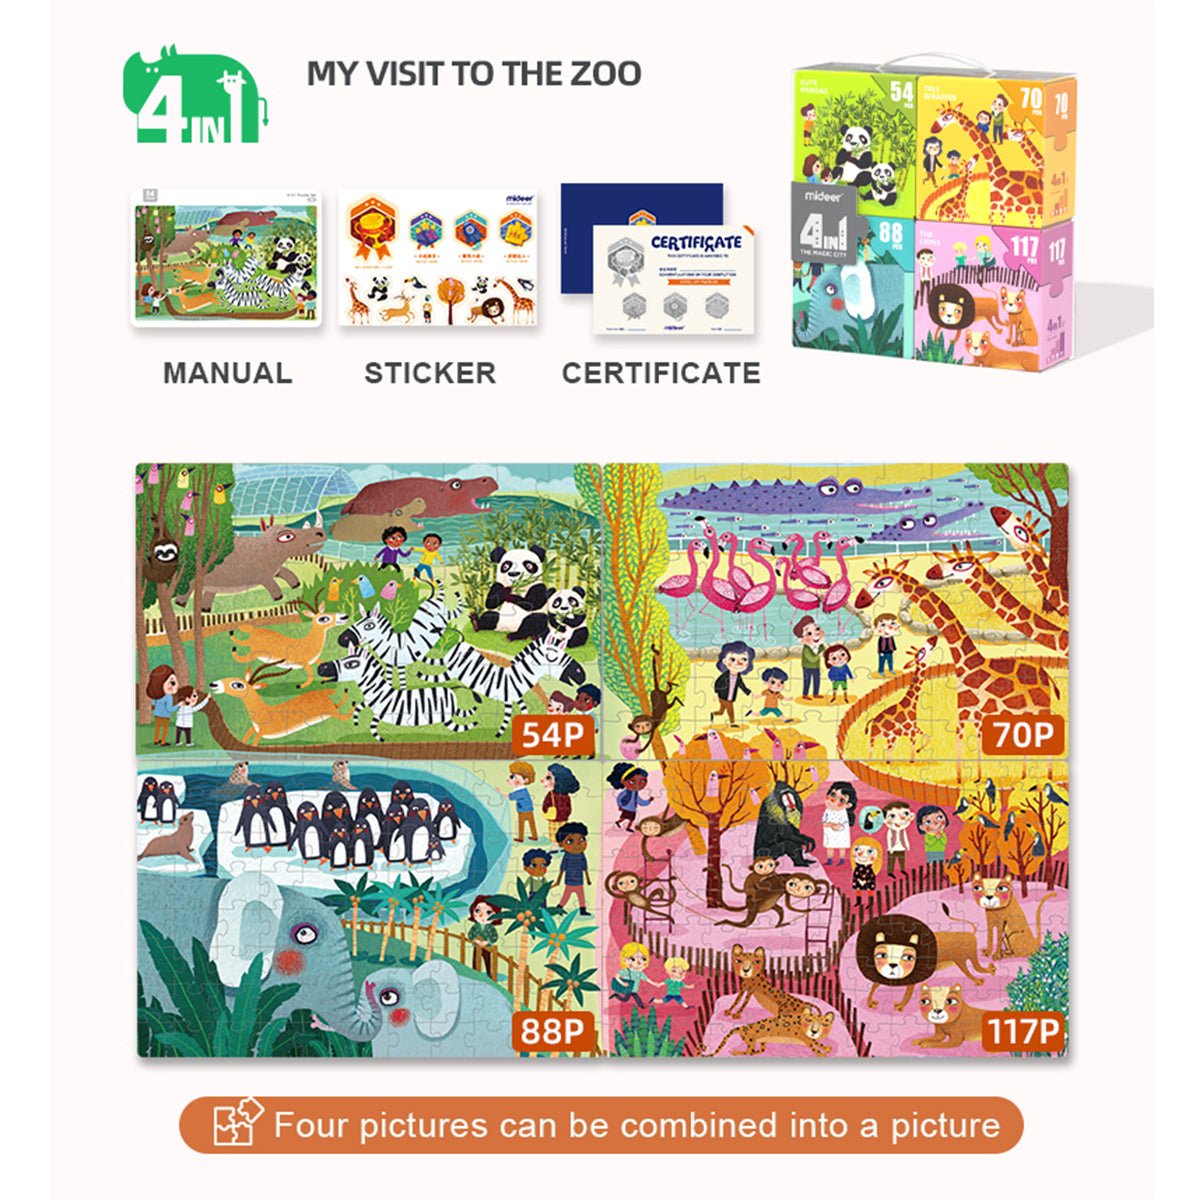 4 In 1 My Visit To The Zoo Puzzle Set 329pcs - 0cm